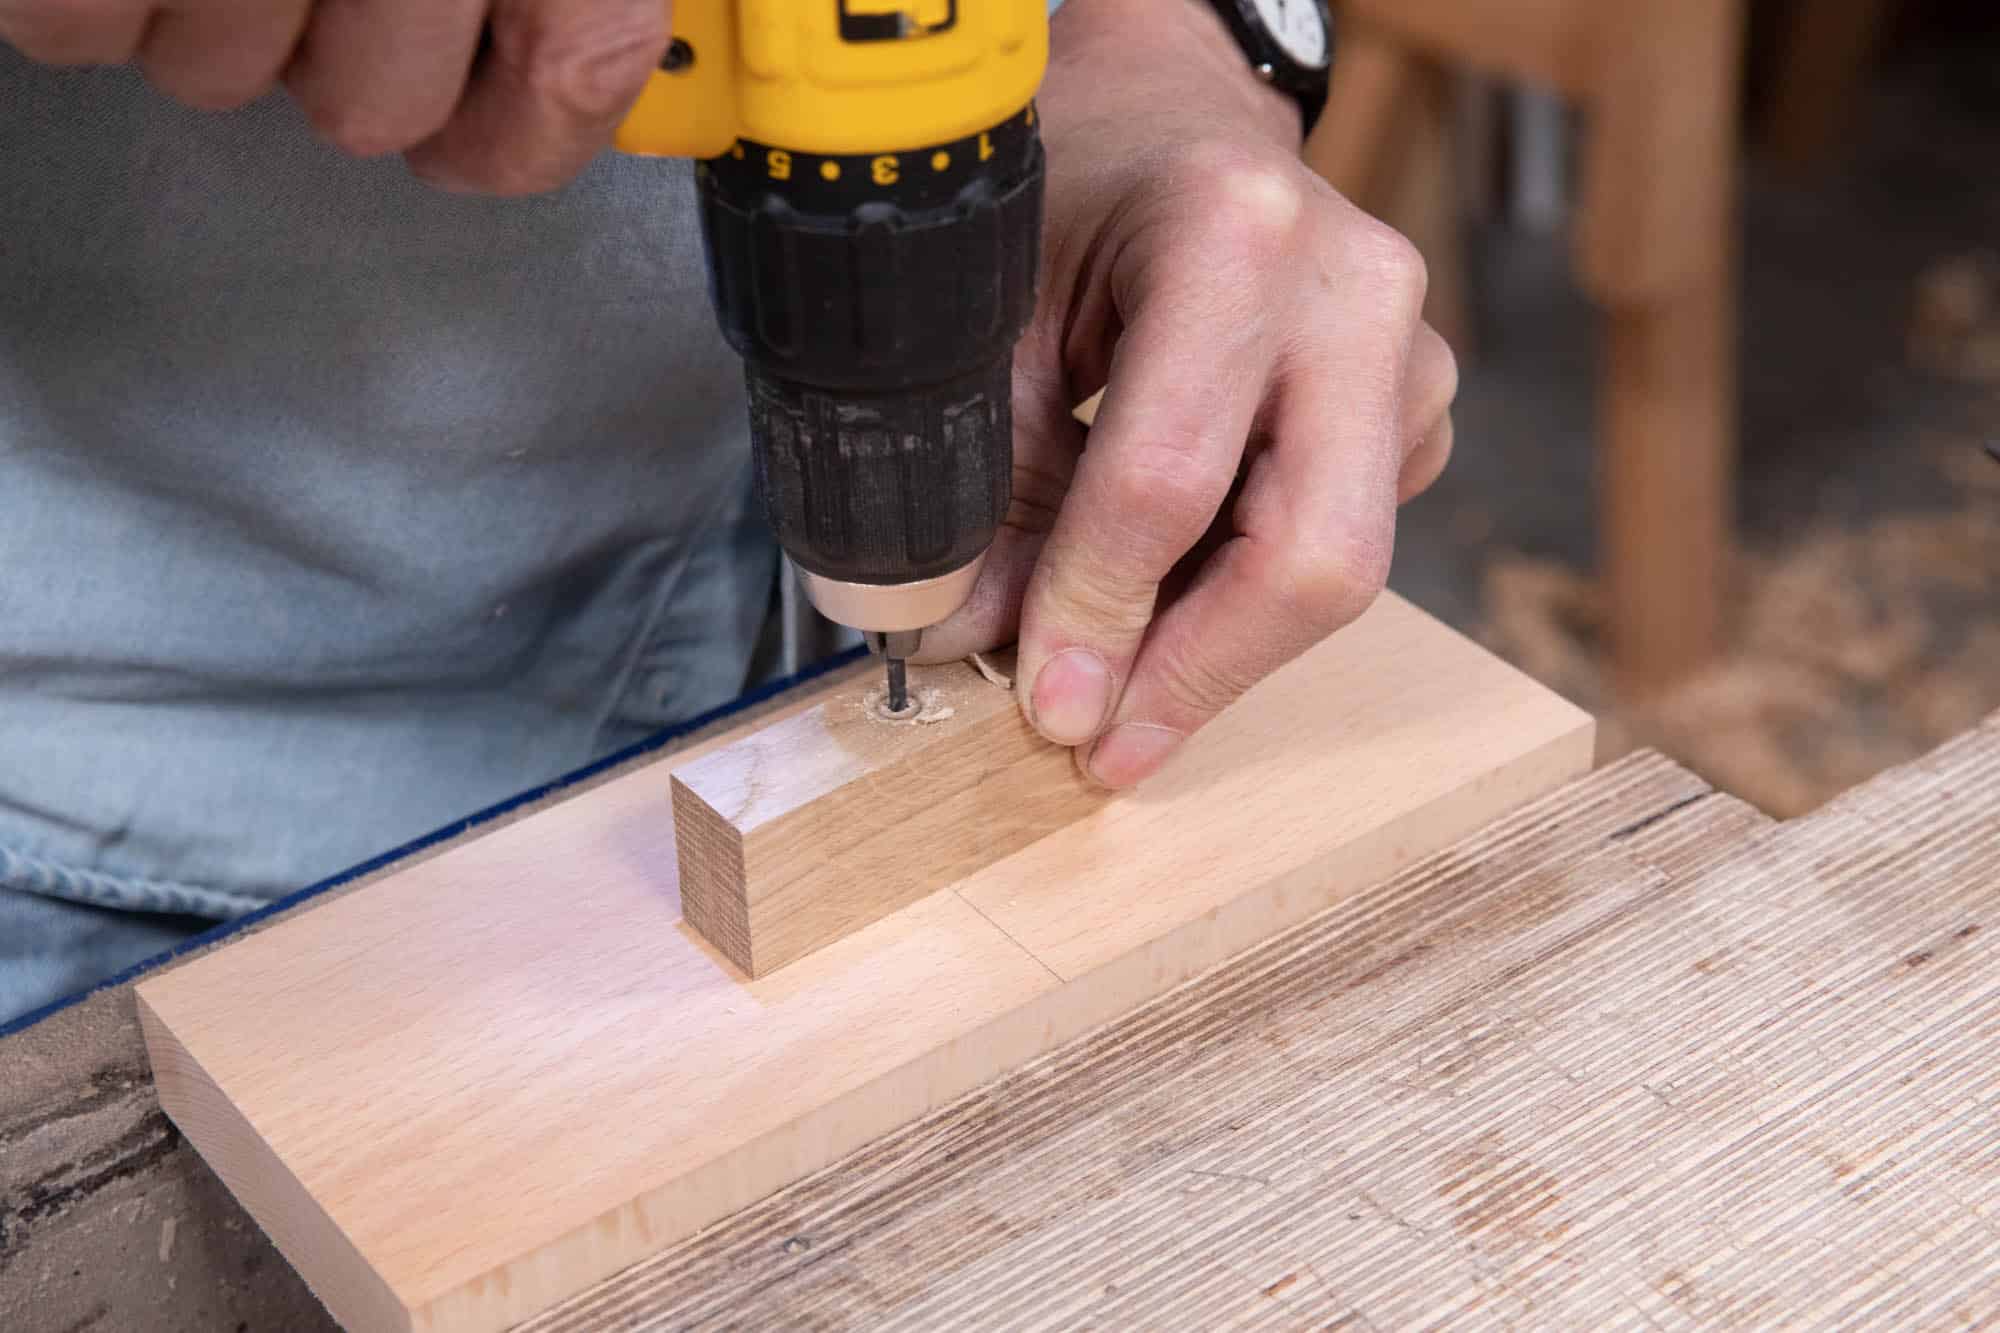 MAKING A Drill Bit GUIDE - Paul Sellers' Blog